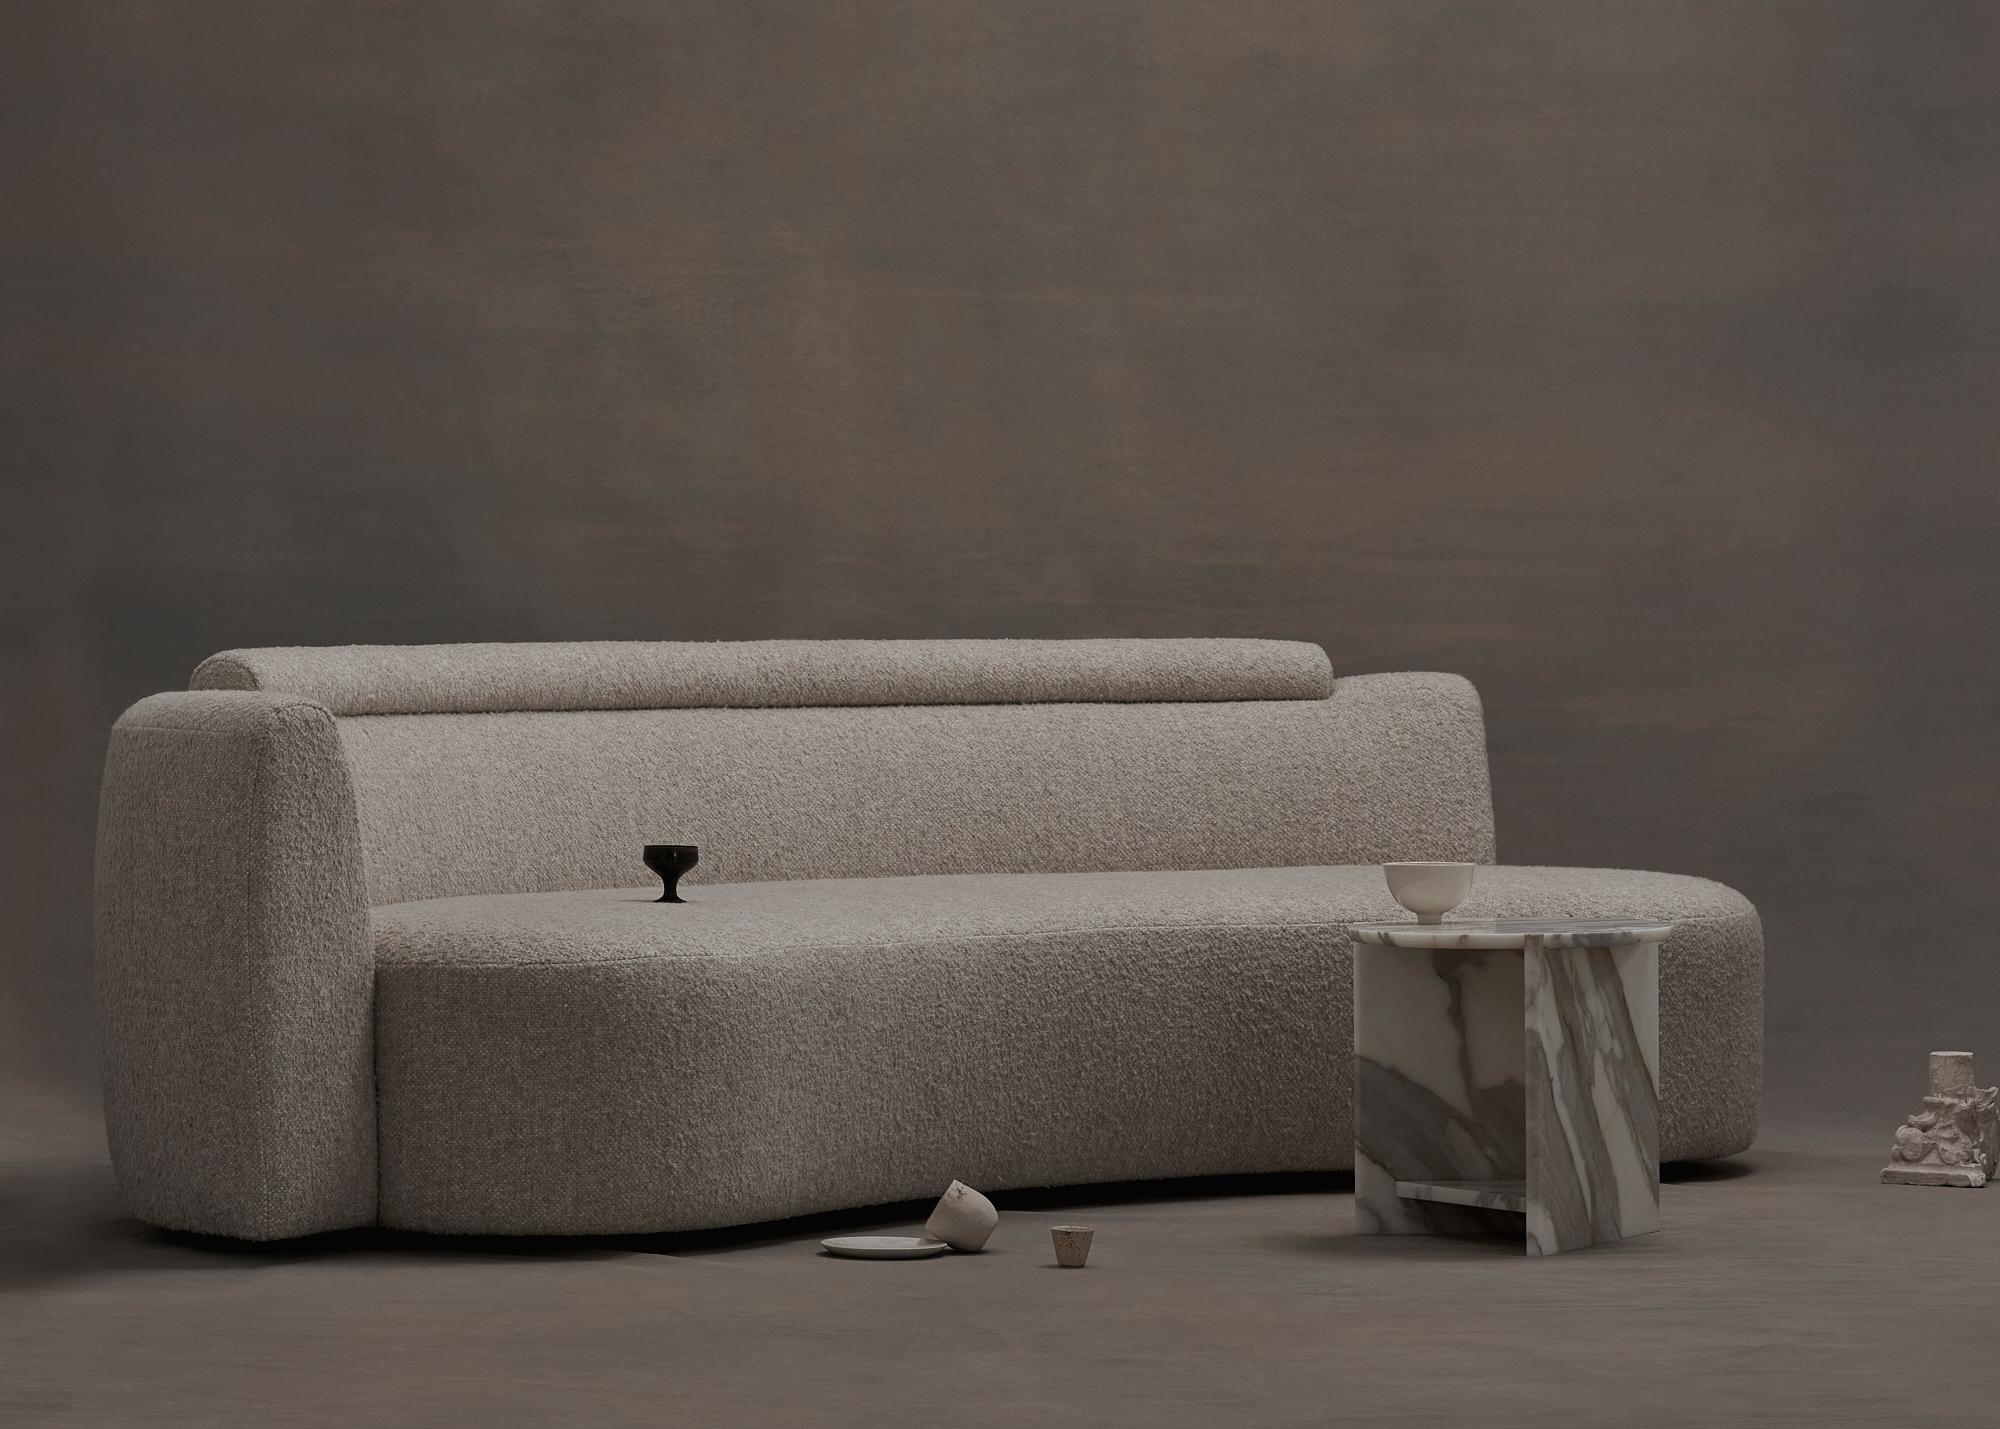 Inspired by rolling waves of the Australian surf that lift you up and swirl around you, the Wave Sofa has been designed as an organic, comfortable shape that evokes a sense of lyricism and play to an interior, whilst still being minimalistic and